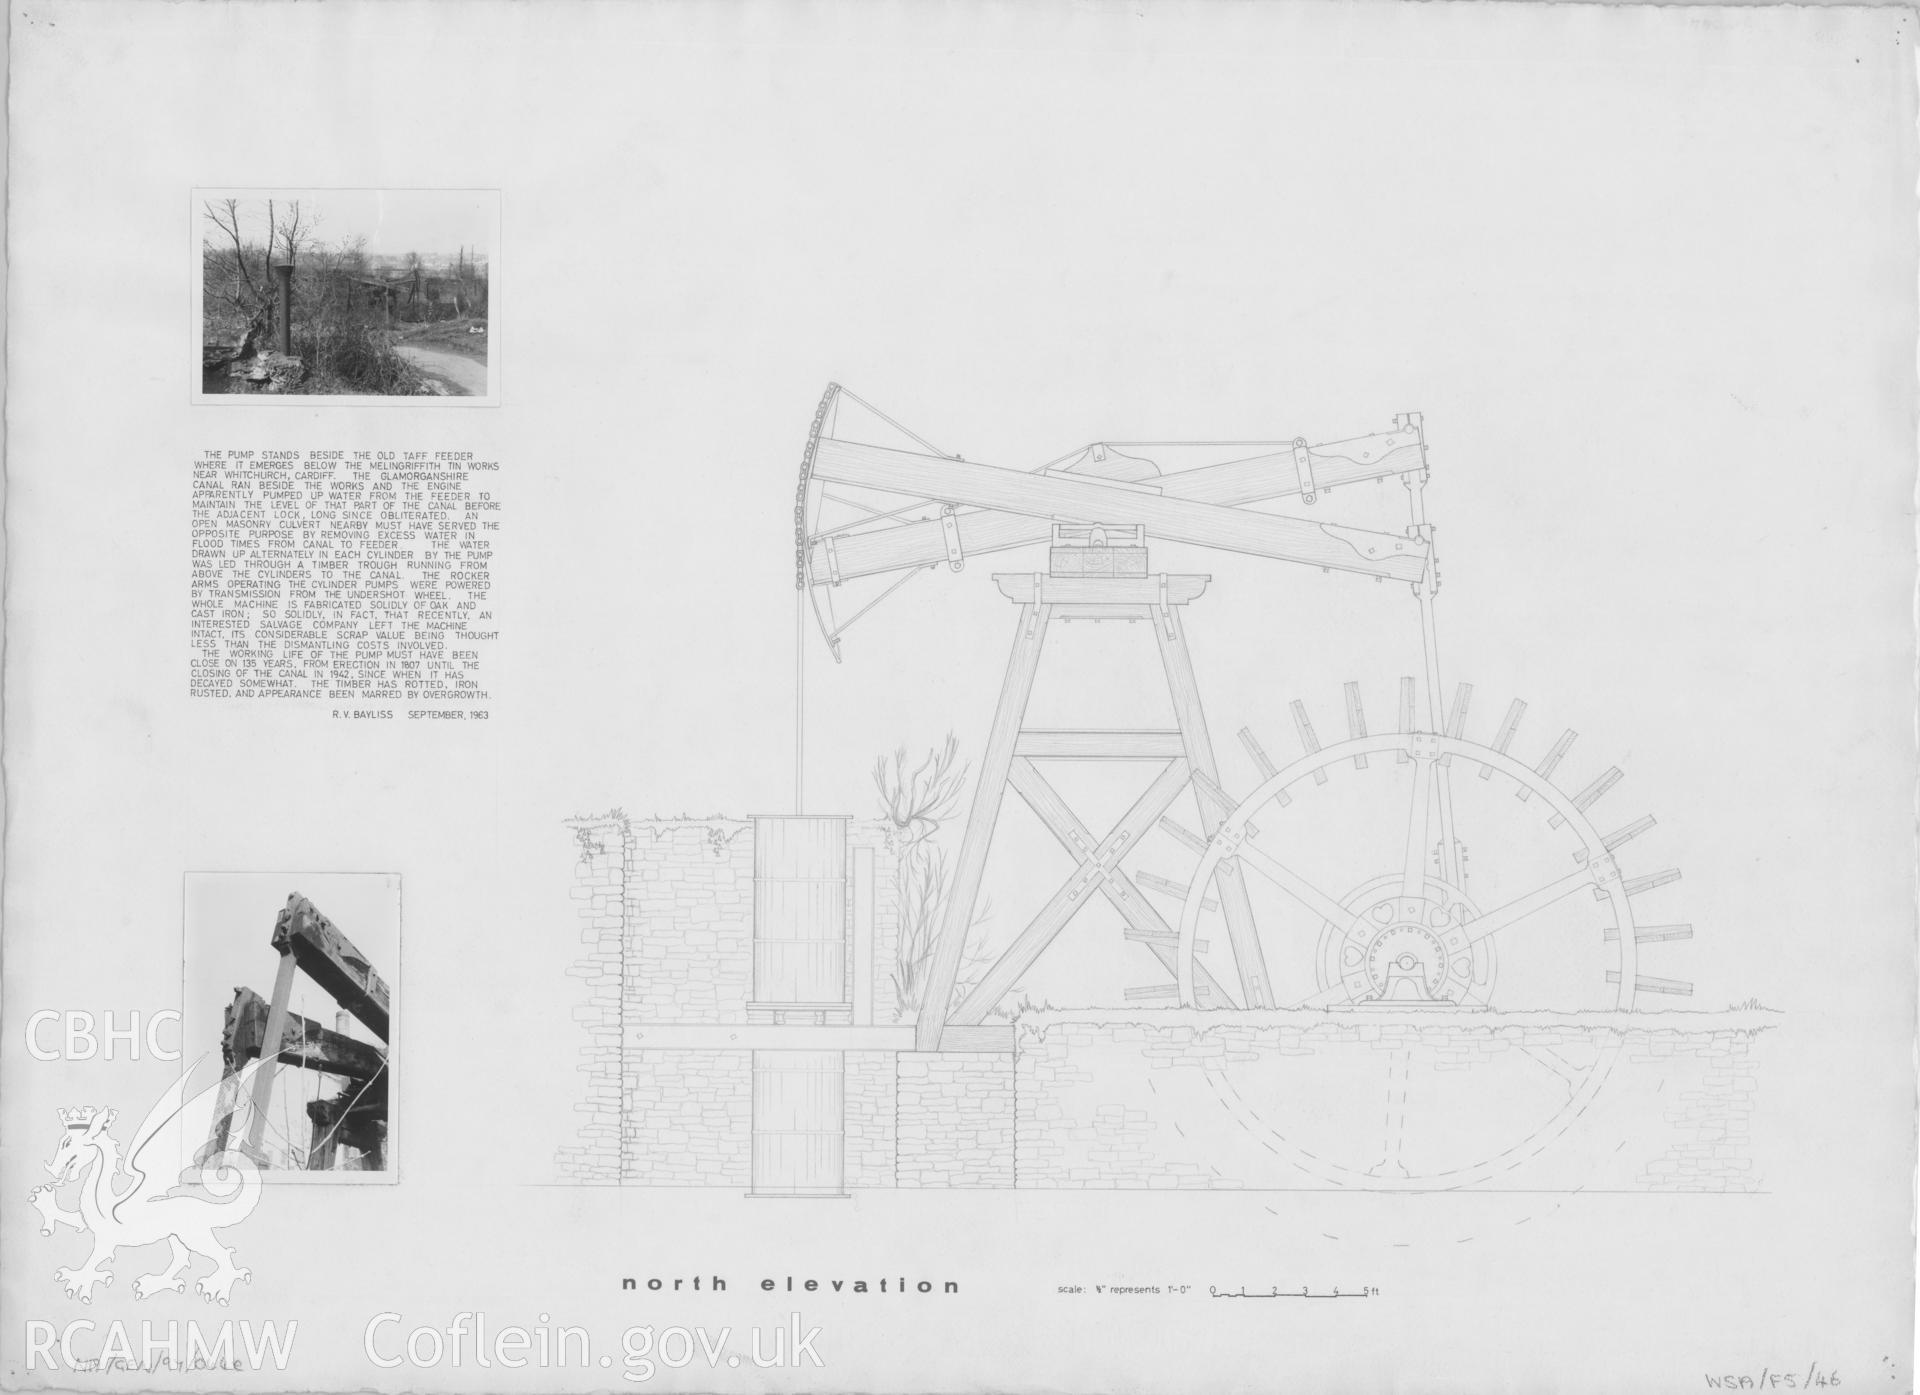 Measured drawing showing north elevation and two B&W photos of Melingriffith Water Pump, produced by R.V. Bayliss and I. Payne, undated.